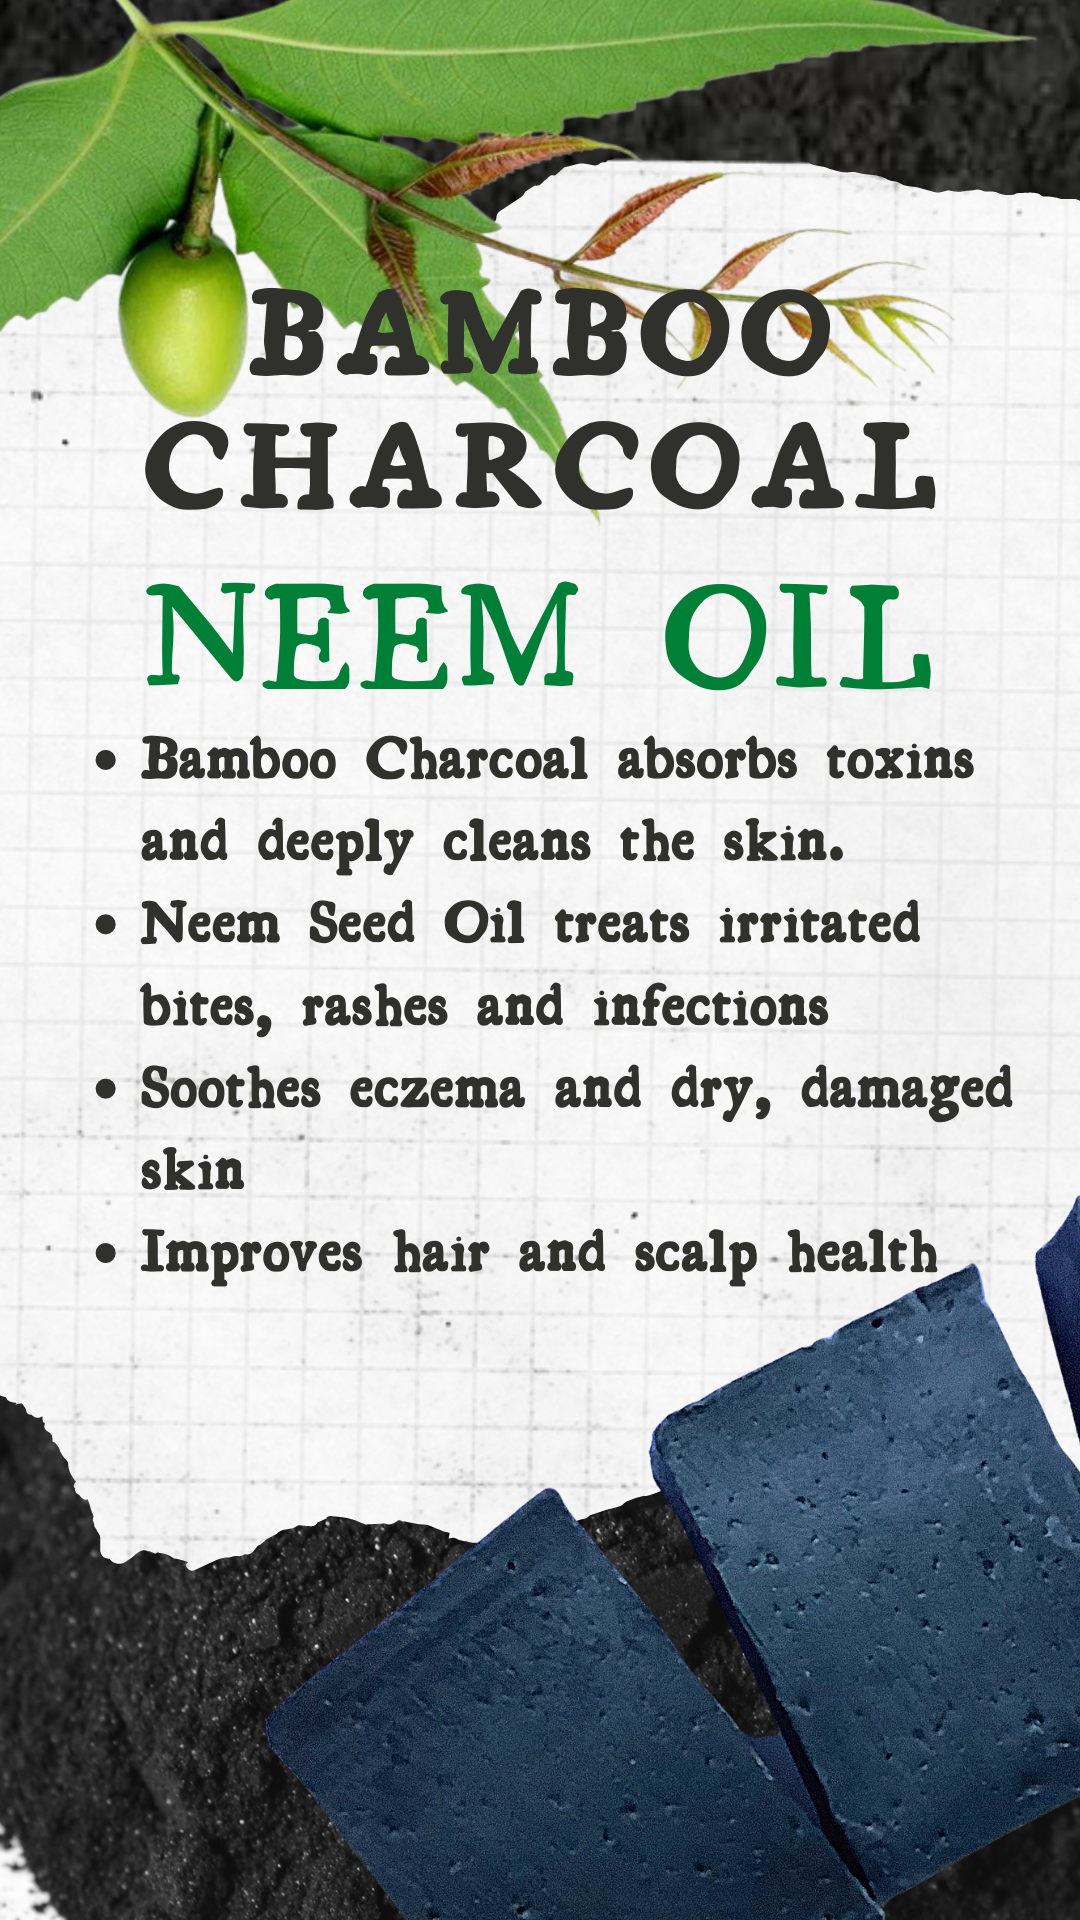 Bamboo Charcoal Neem Seed Oil Soap